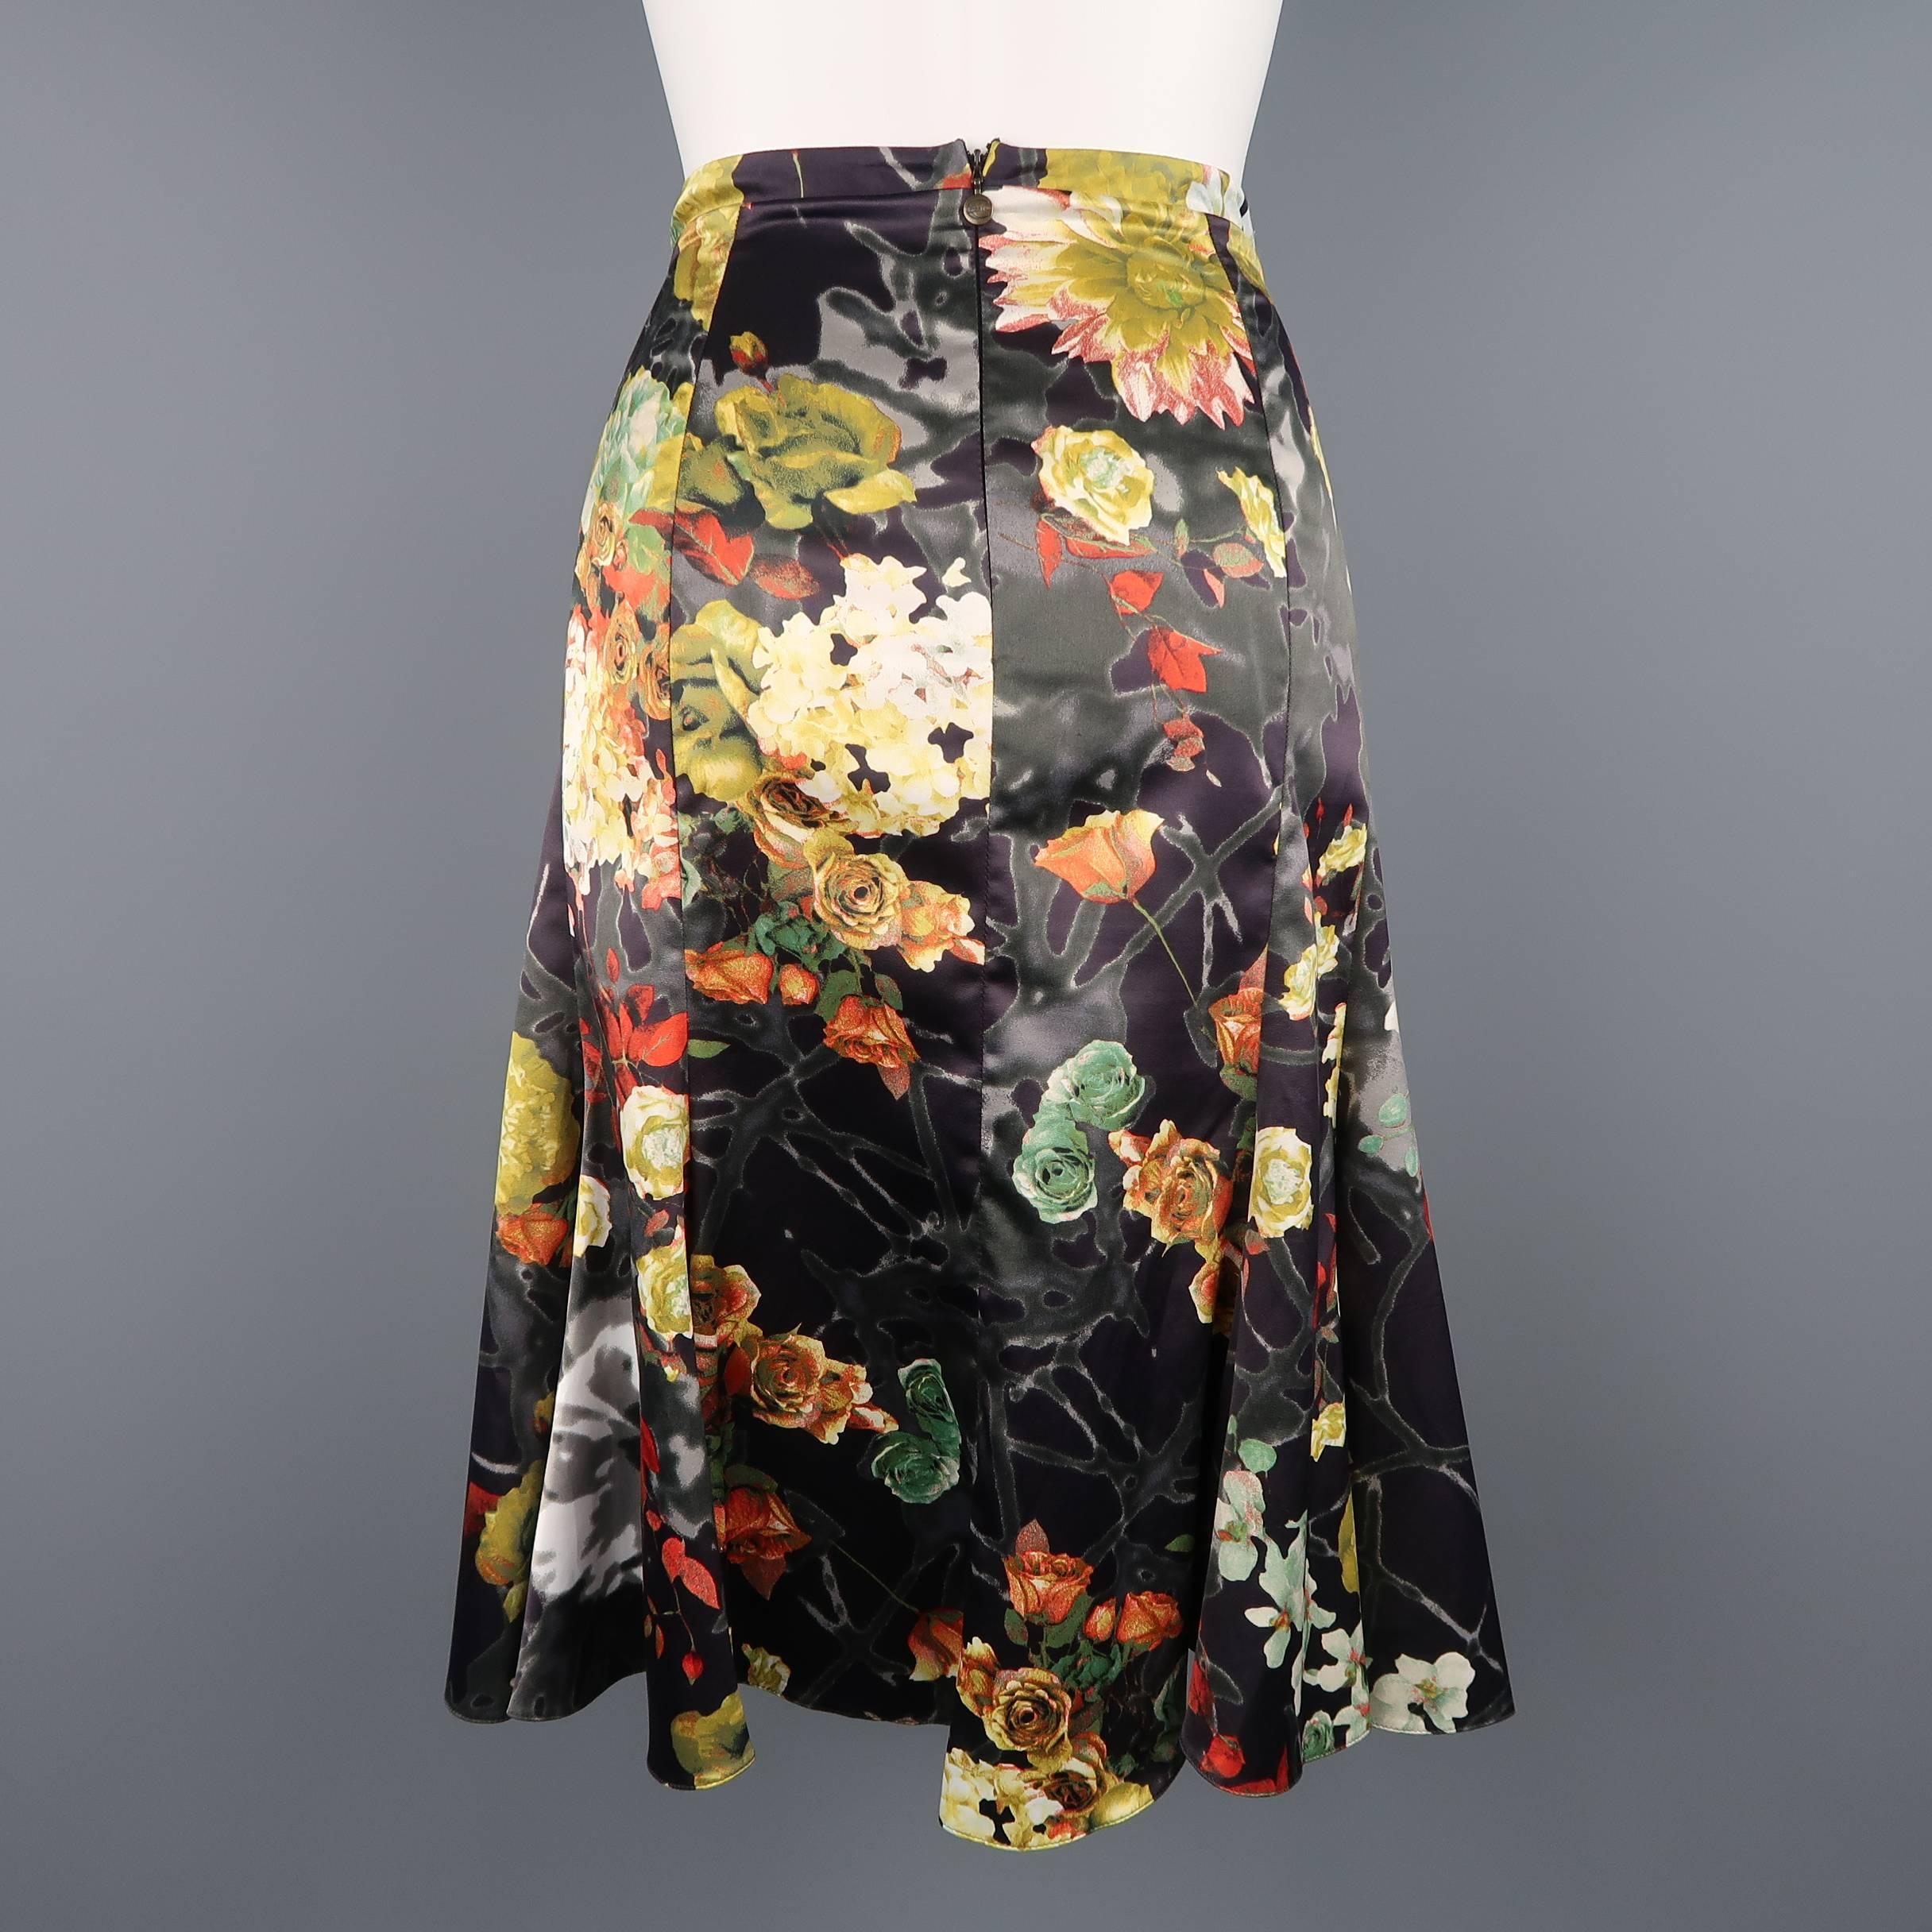 Just Cavalli Charcoal Multicolor Floral Print Satin Flare Skirt 1